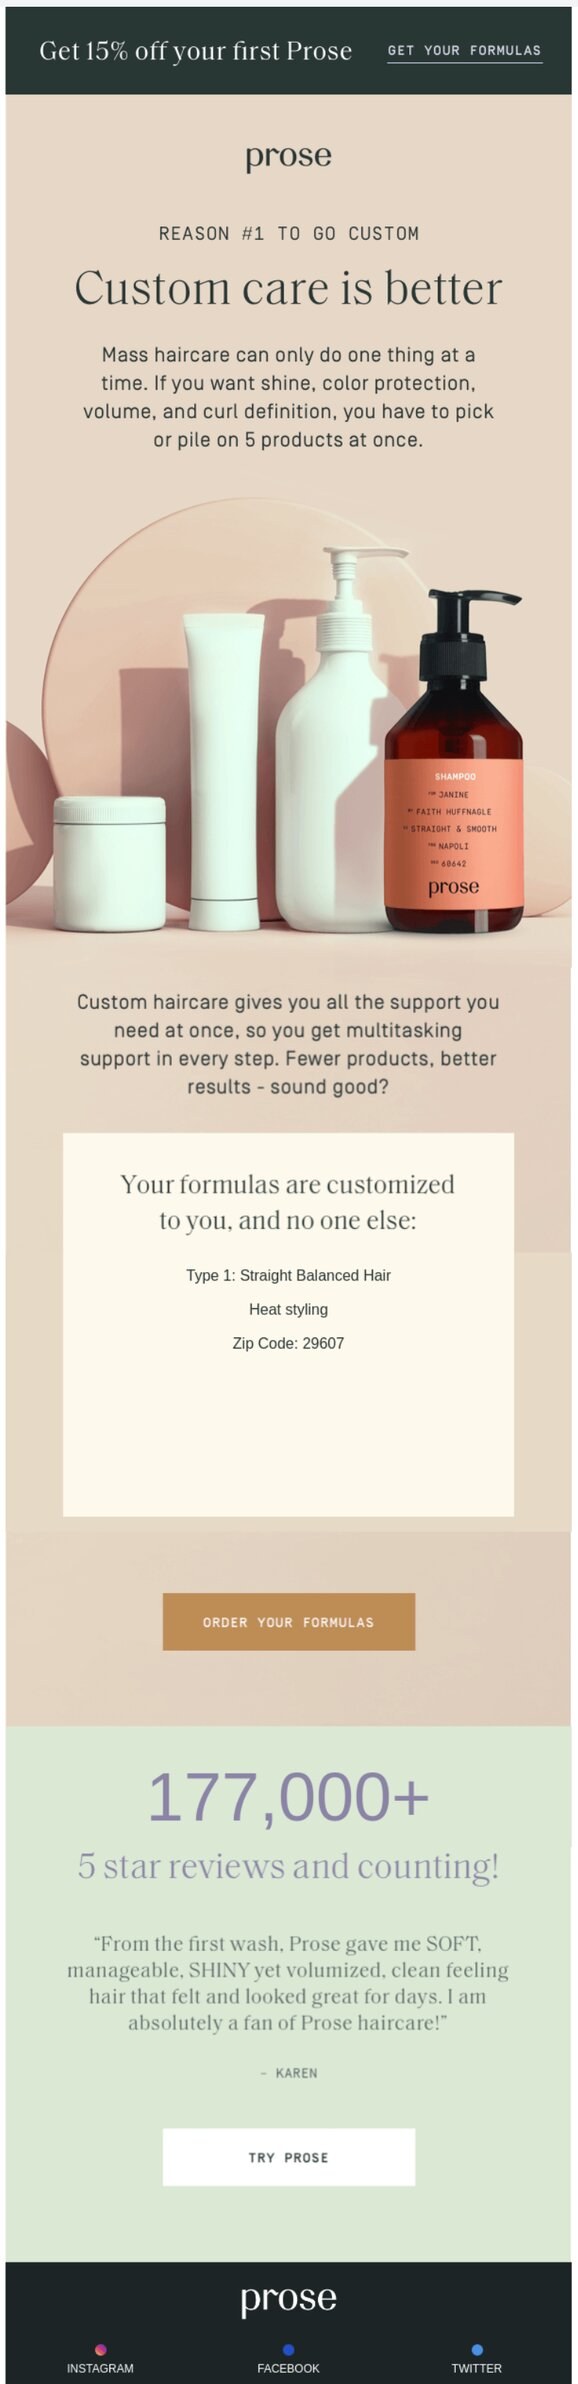 Haircare product sample promotions